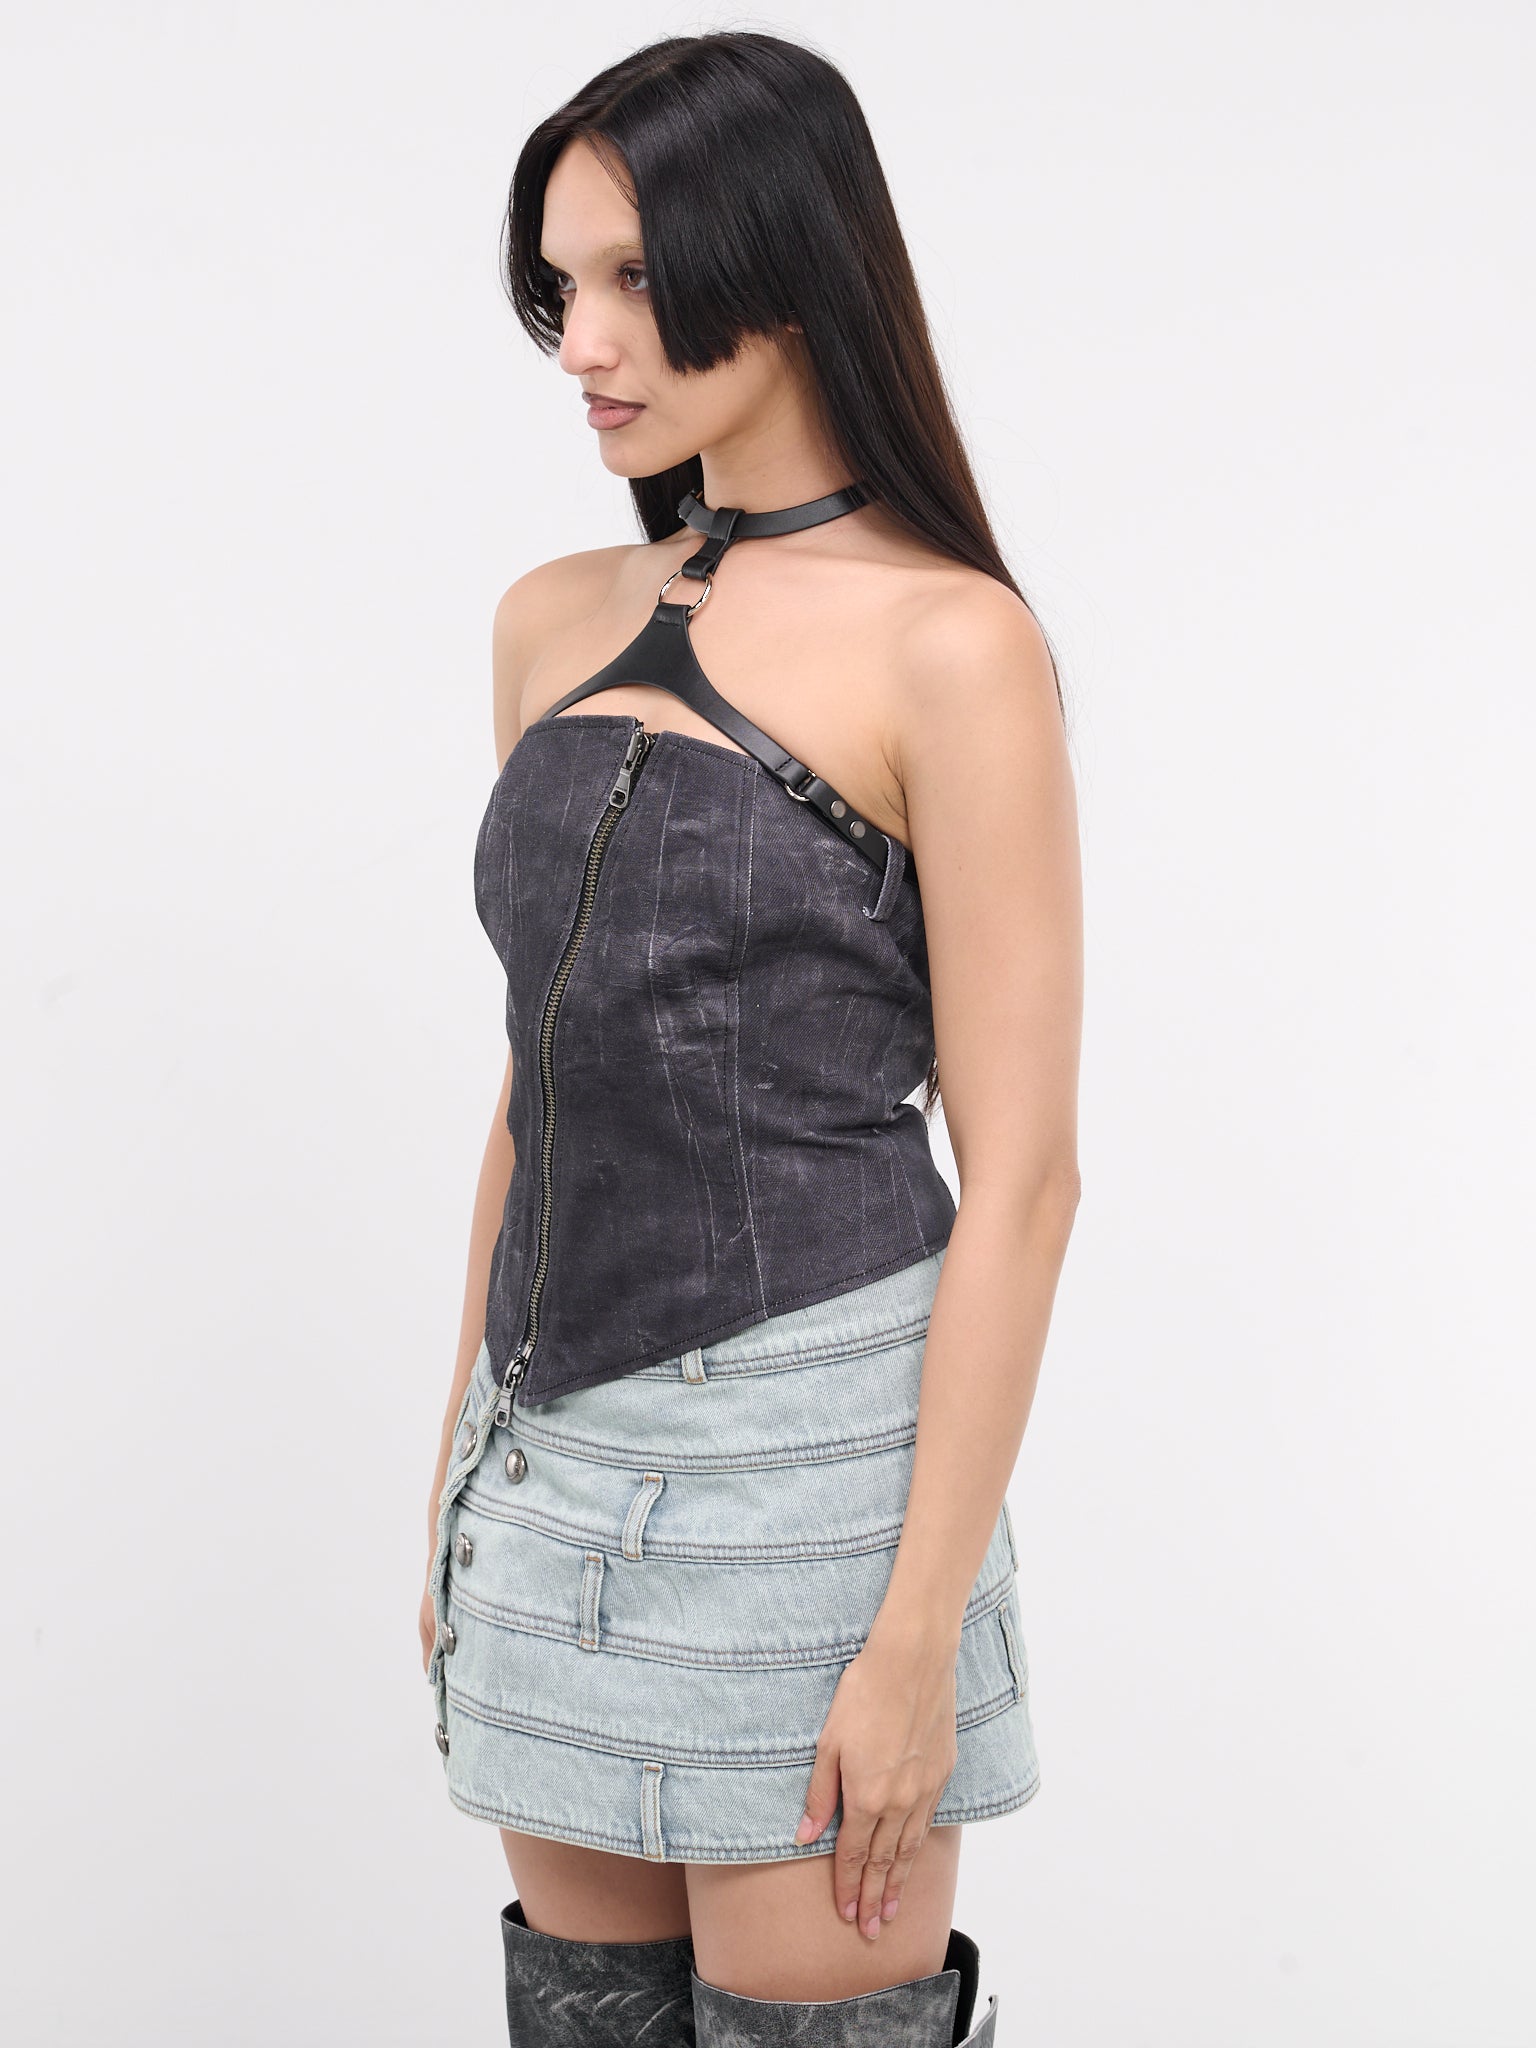 Scratch Leather Printed Bustier (ATB1094W-BLACK)